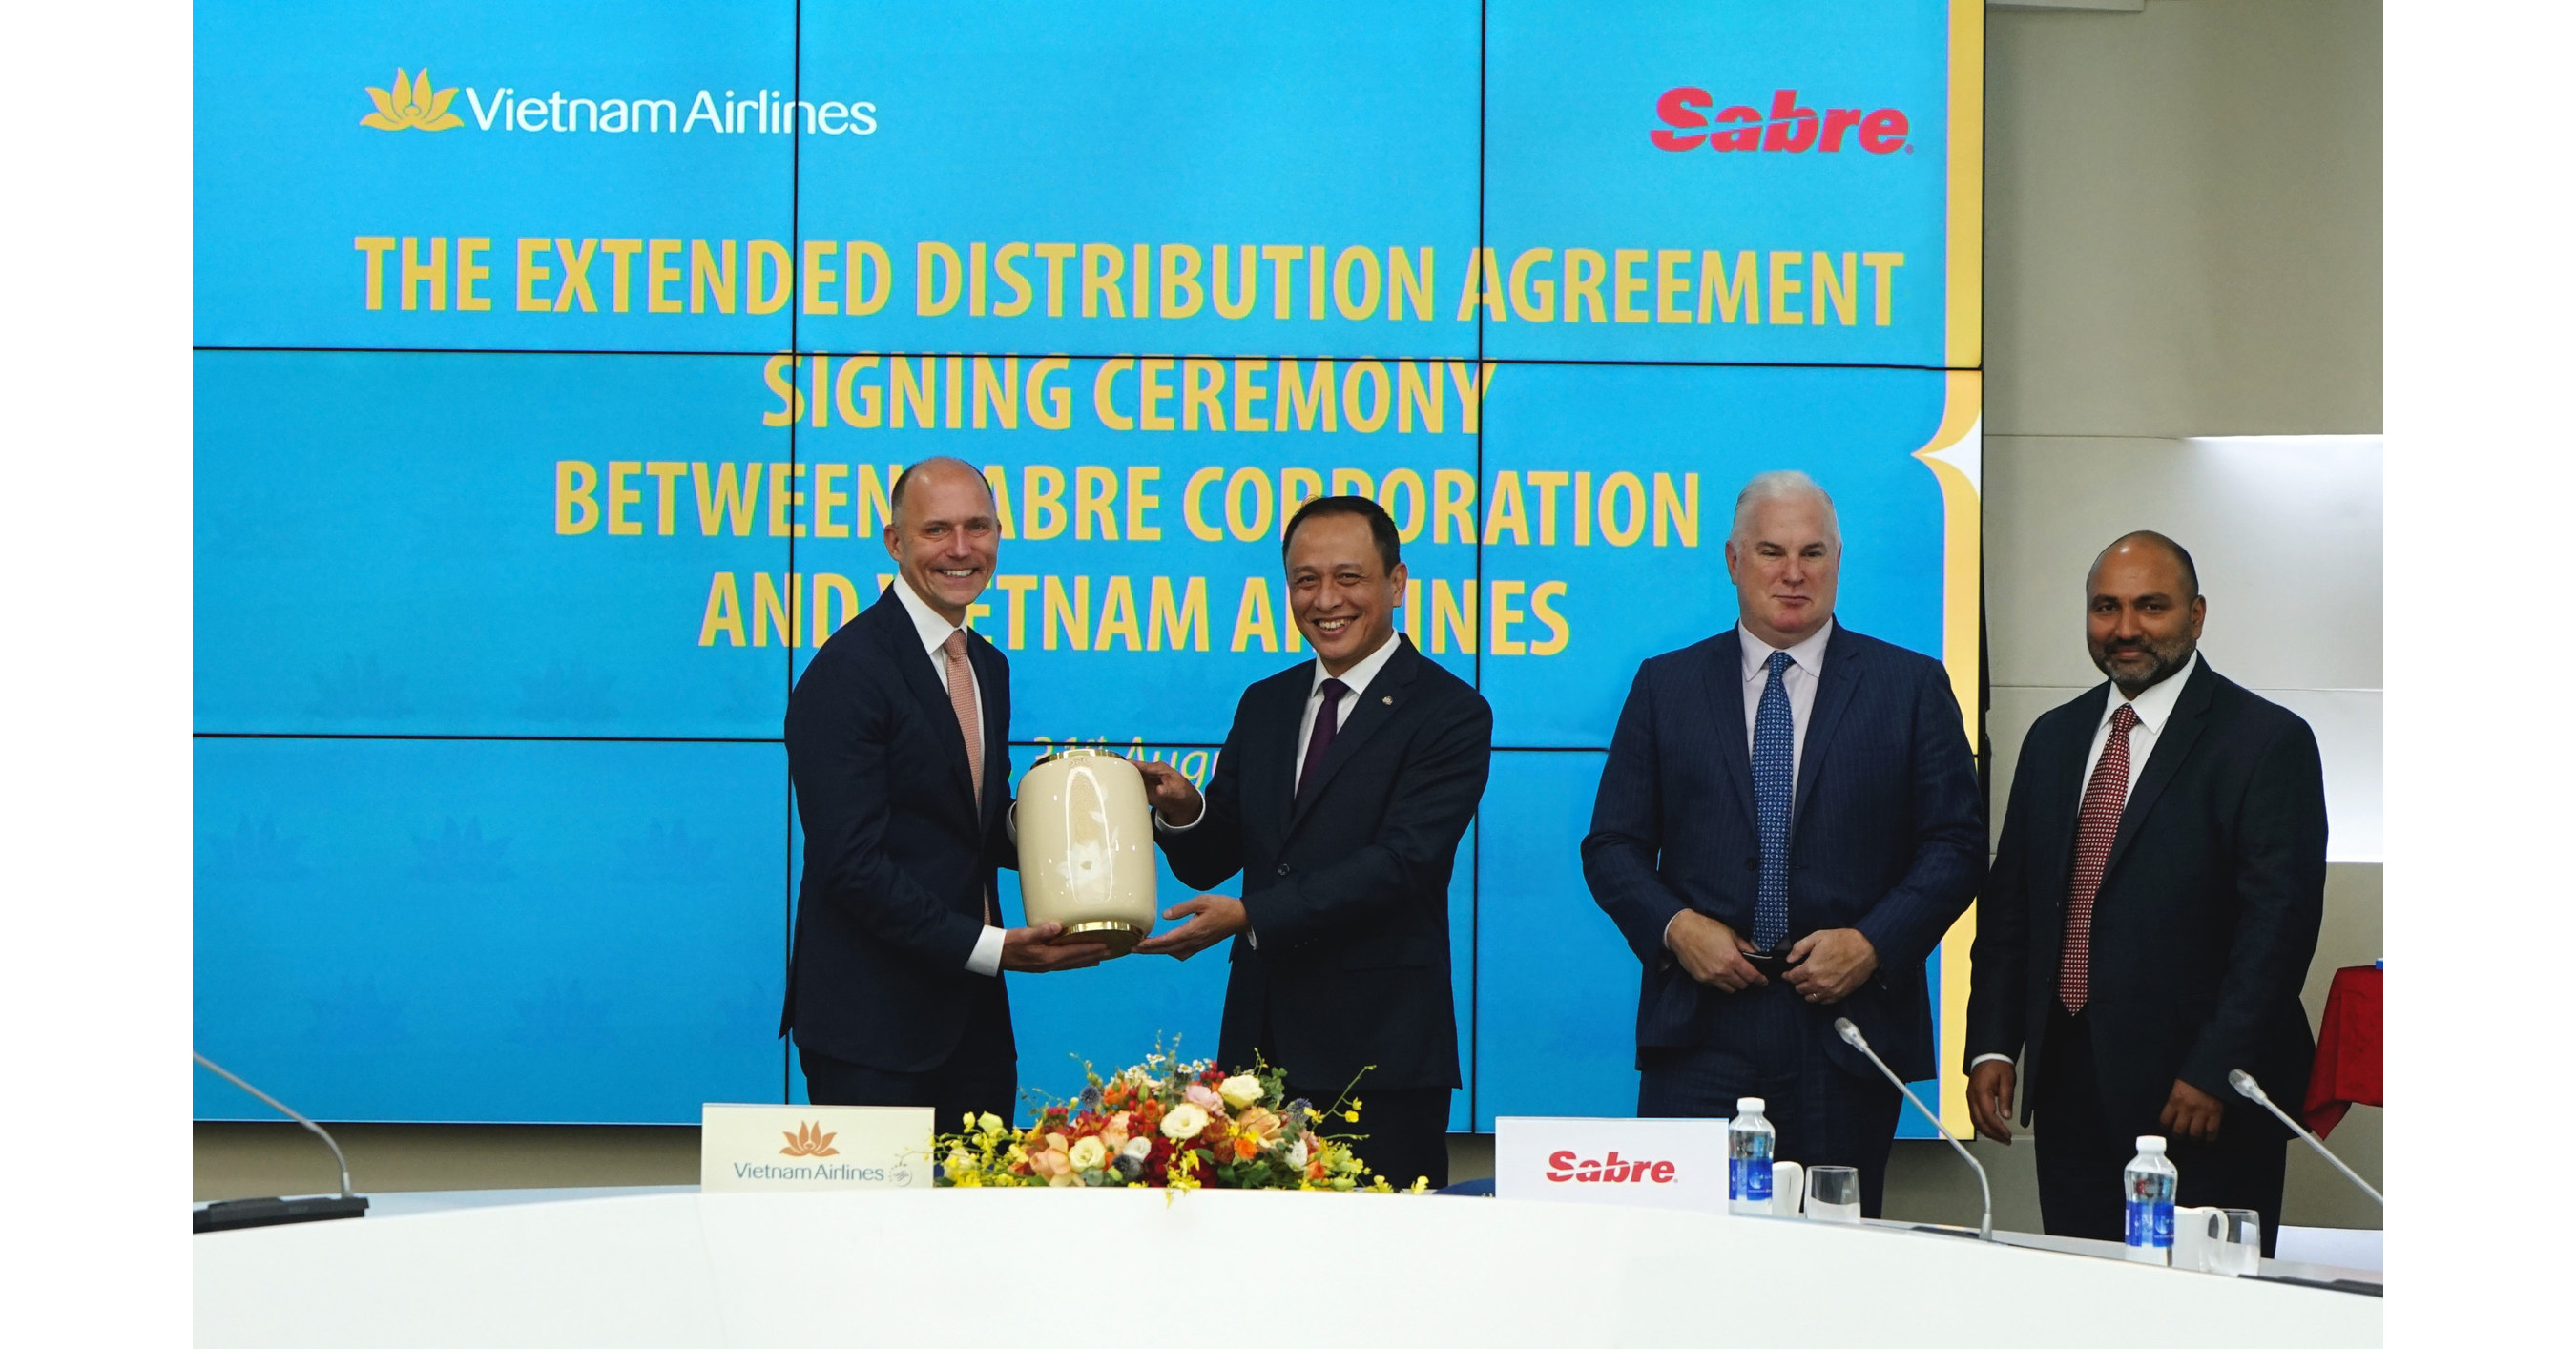 Vietnam Airlines extends long-standing relationship with Sabre as the carrier continues to play significant role in Vietnam’s tourism resurgence